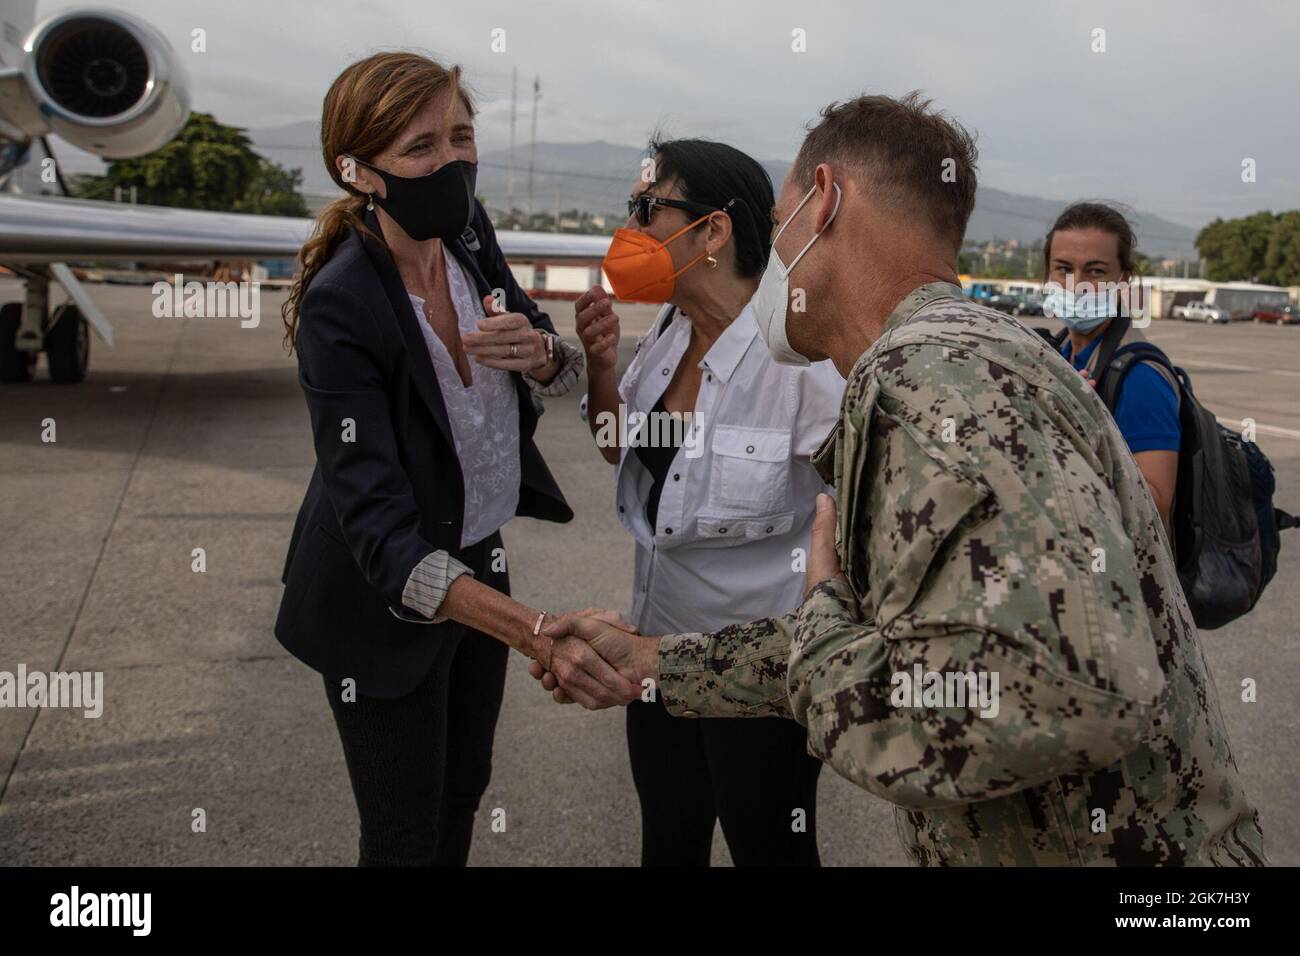 Samantha Power, Administrator for the U.S. Agency for International Development, meets Joint Task Force-Haiti Commander Rear Adm. Keith Davids at the Port-au-Prince international airport on Aug. 26, 2021. Joint Task Force-Haiti deployed quickly to support U.S. Agency for International Development and enable airlift capability to deliver humanitarian aid to remote locations in the southern peninsula of Haiti. Stock Photo